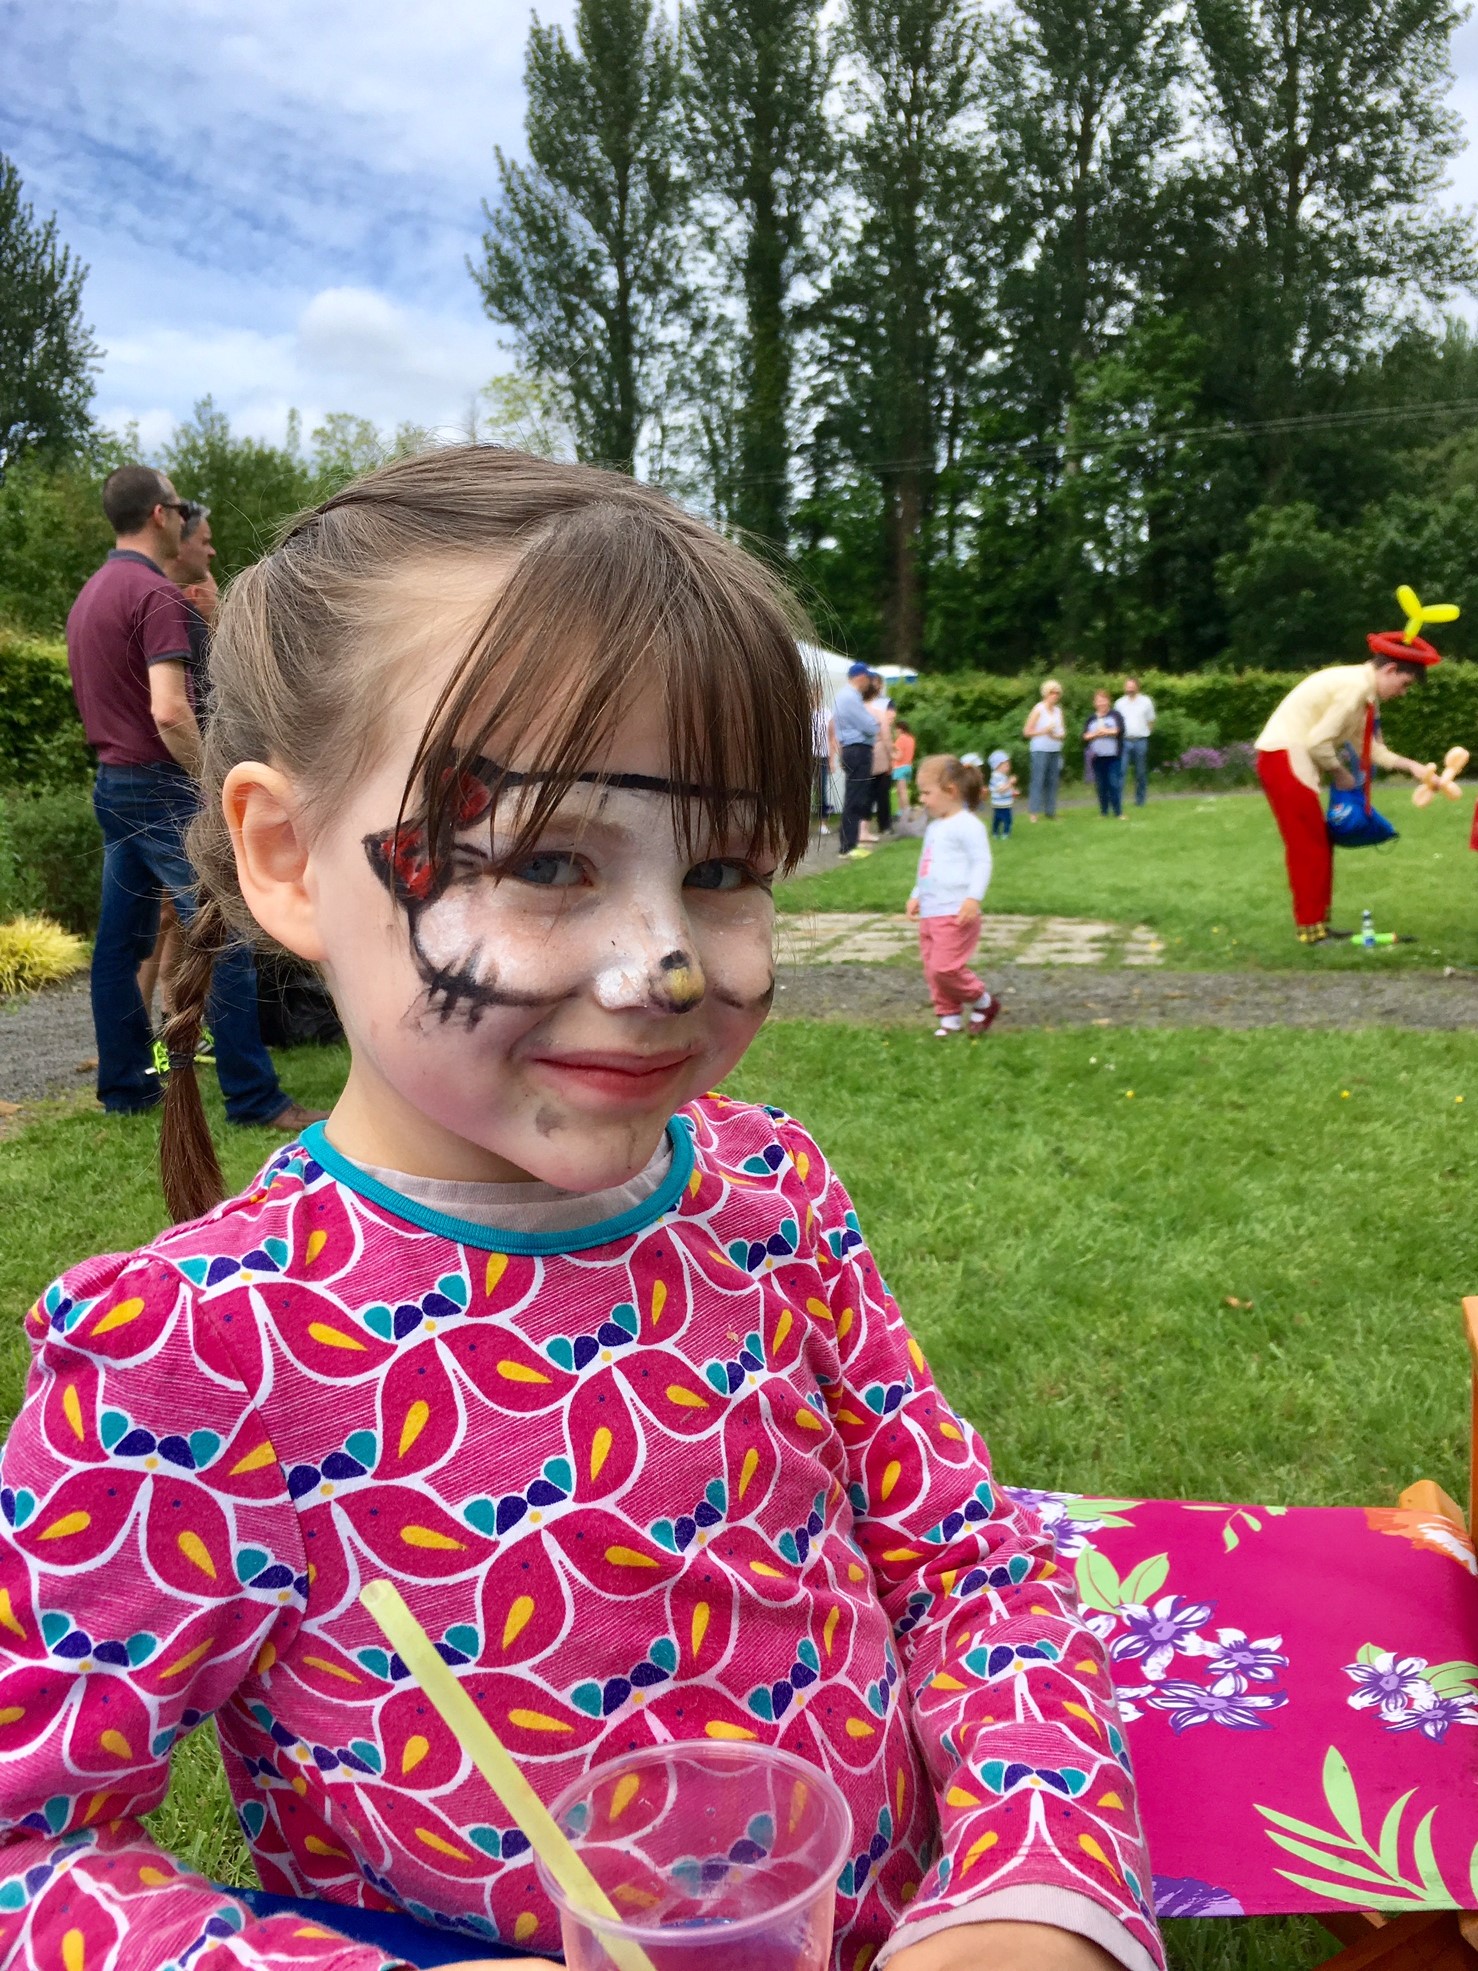 In Pictures: Ballyroan family fun day proves a big success - Laois Today